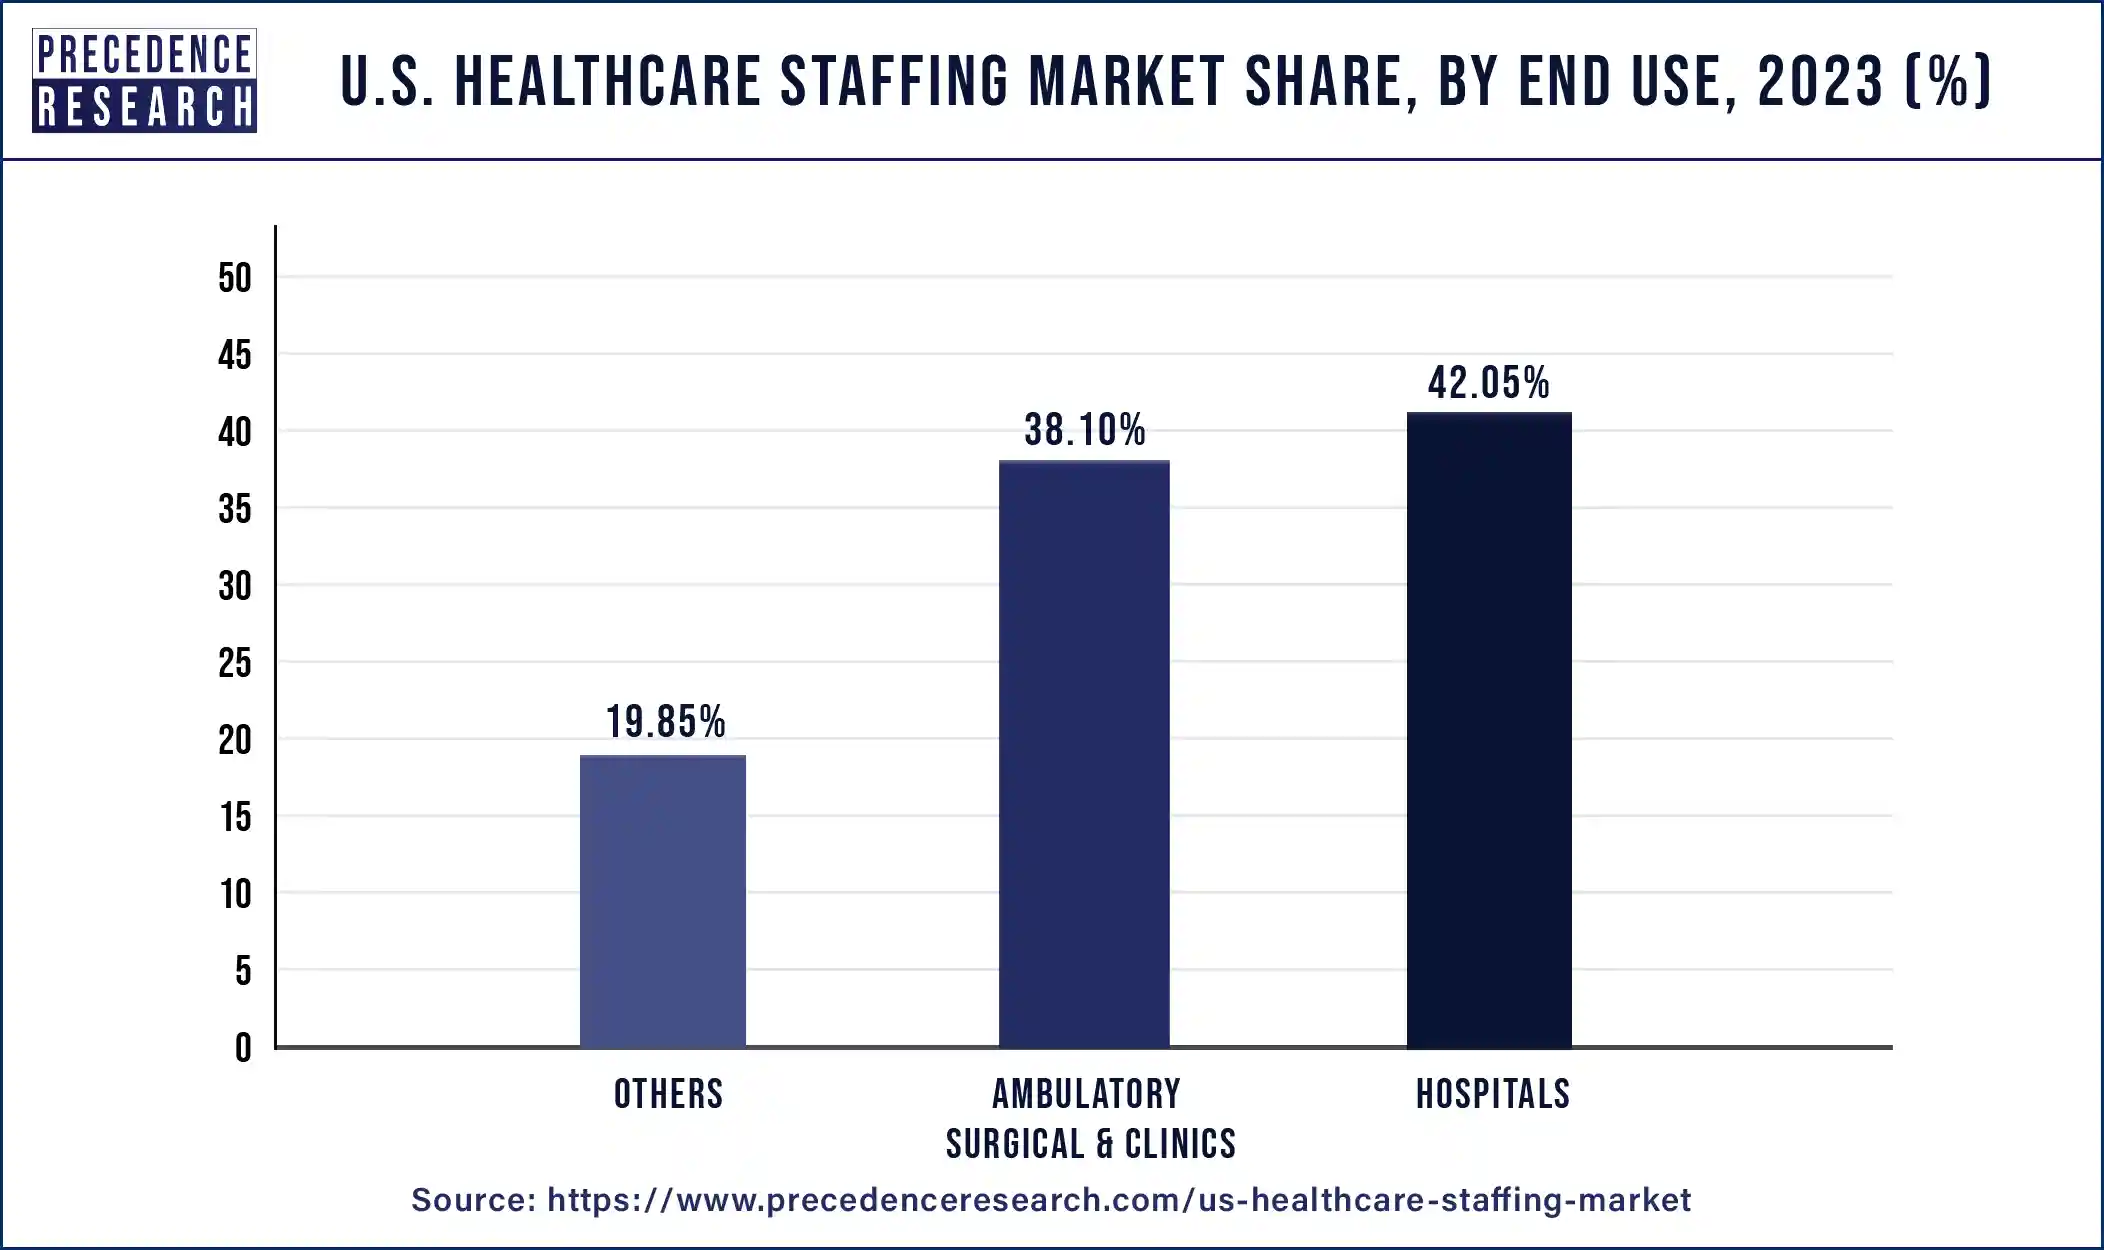 U.S. Healthcare Staffing Market Share, By End Use, 2023 (%)